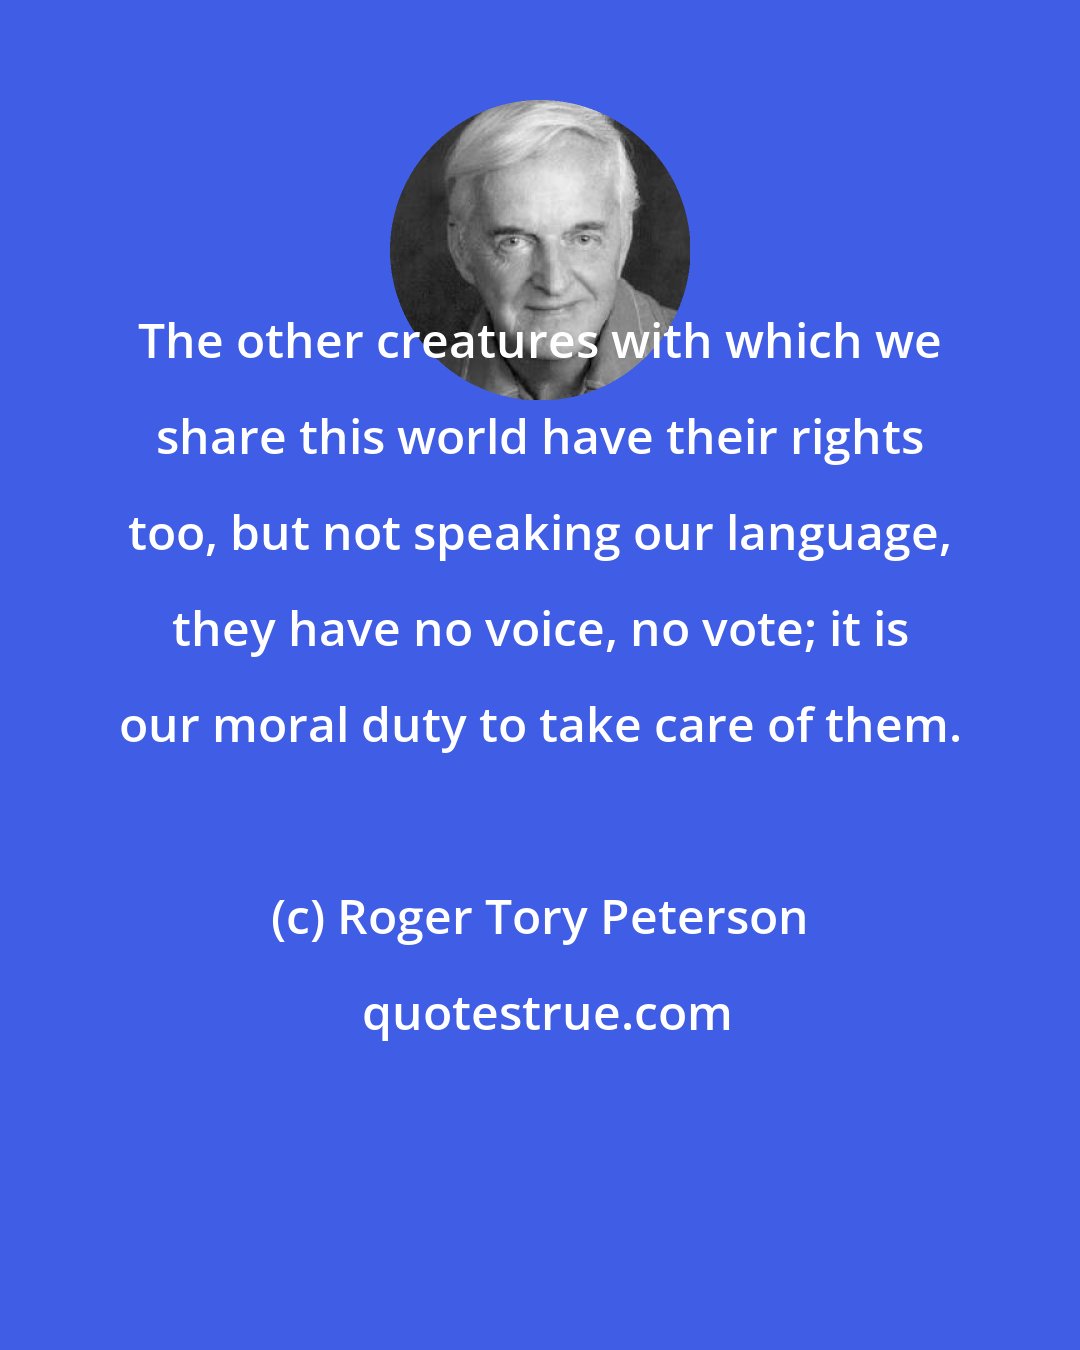 Roger Tory Peterson: The other creatures with which we share this world have their rights too, but not speaking our language, they have no voice, no vote; it is our moral duty to take care of them.